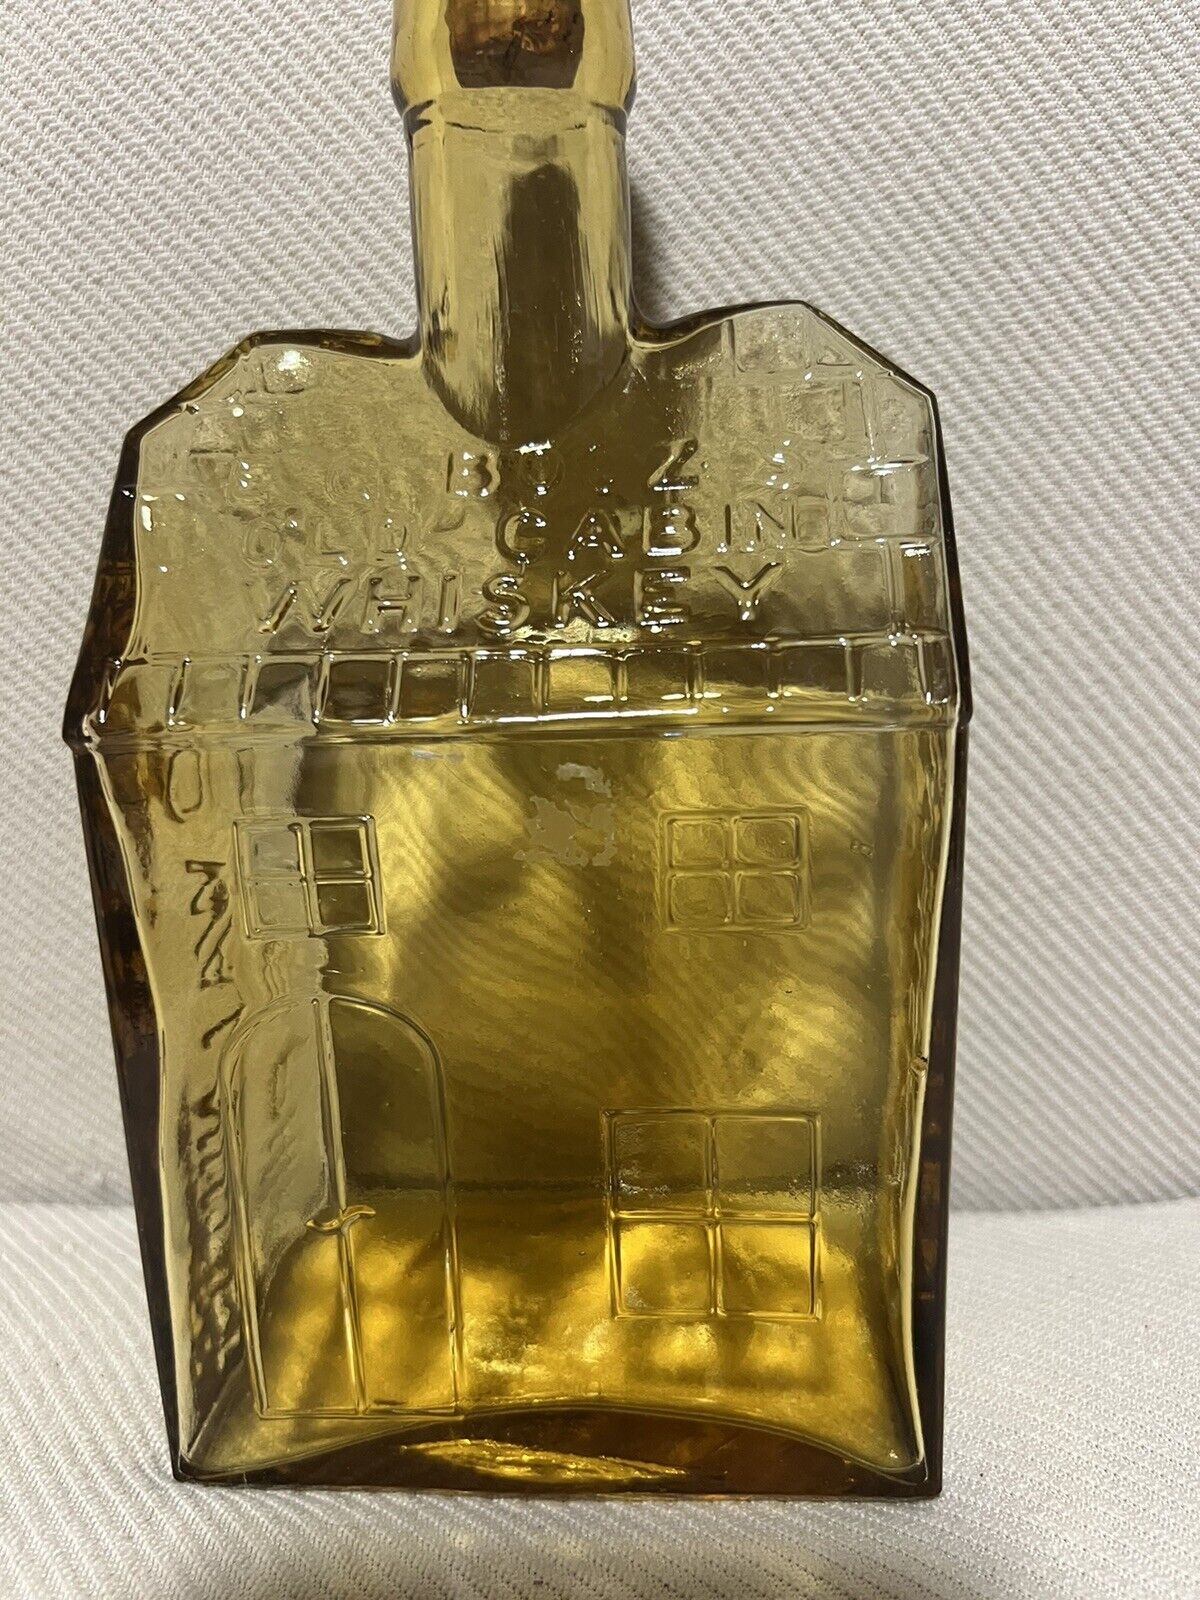 Vintage 1840 E C BOOZ’S  Amber Old Cabin Whiskey Glass Bottle   8.5 In With Cork